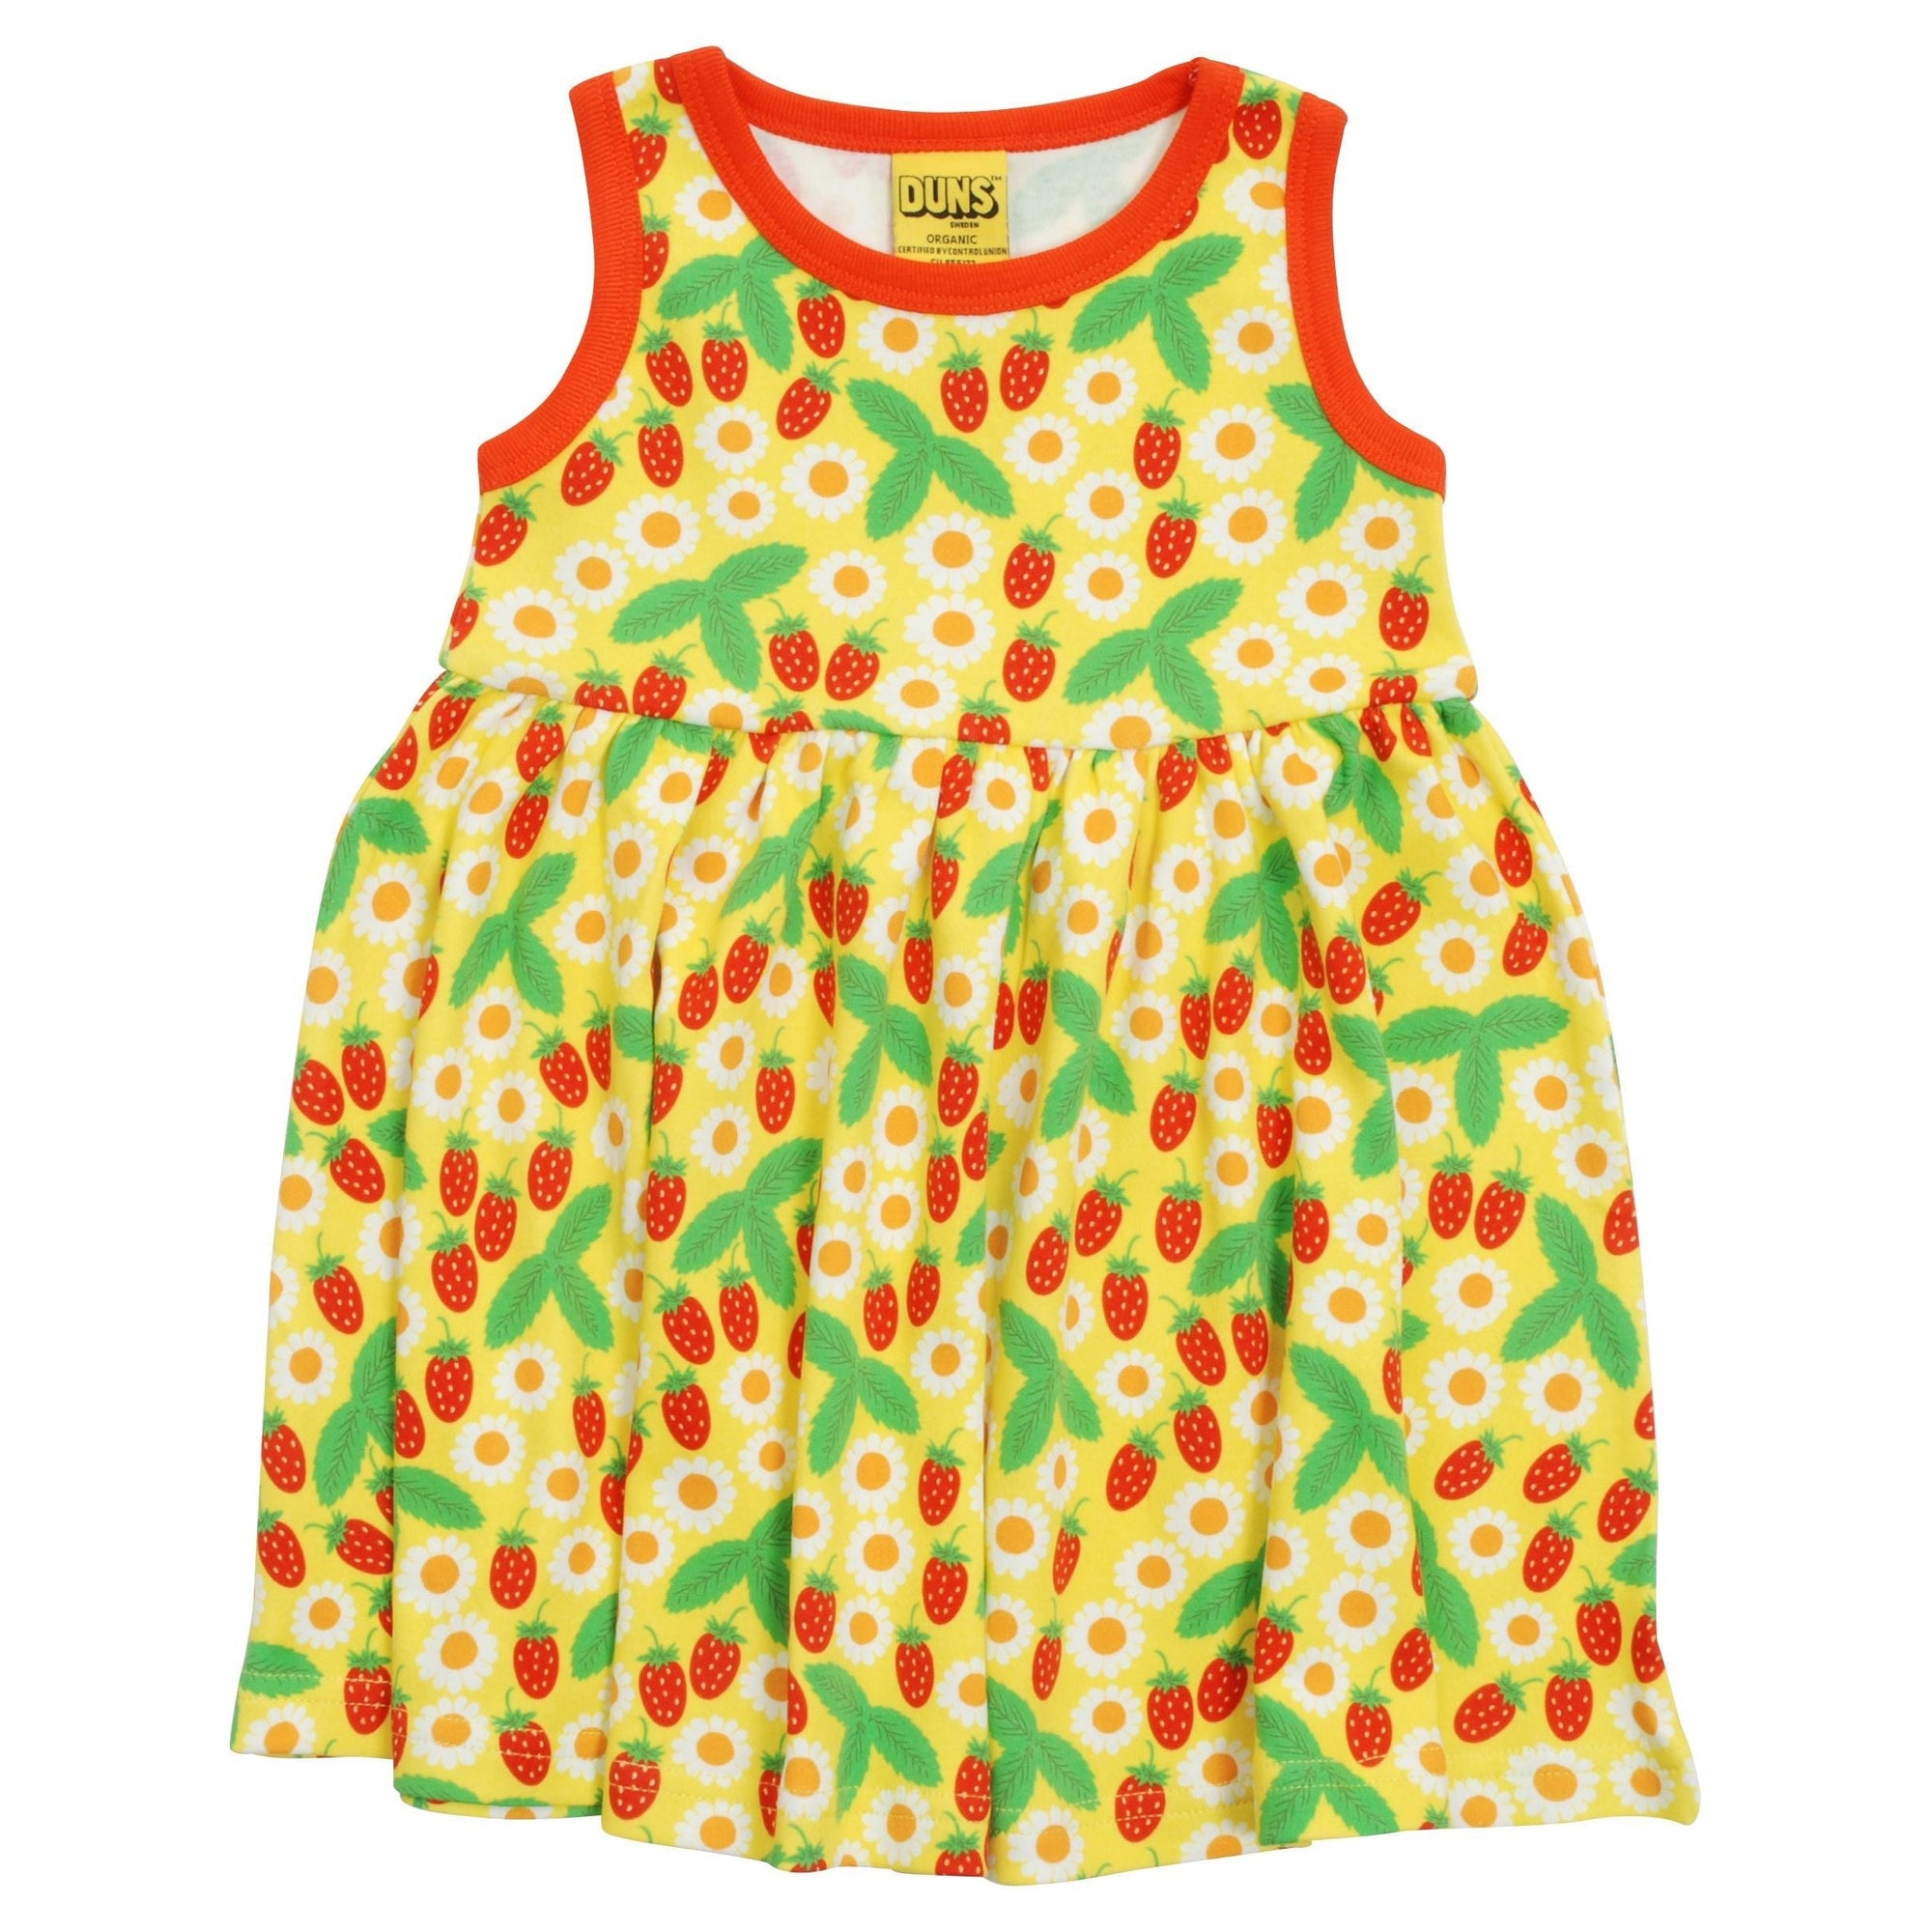 Strawberry - Buttercup Sleeveless Dress With Gathered Skirt - 2 Left Size 9-10 & 12-13 years-Duns Sweden-Modern Rascals